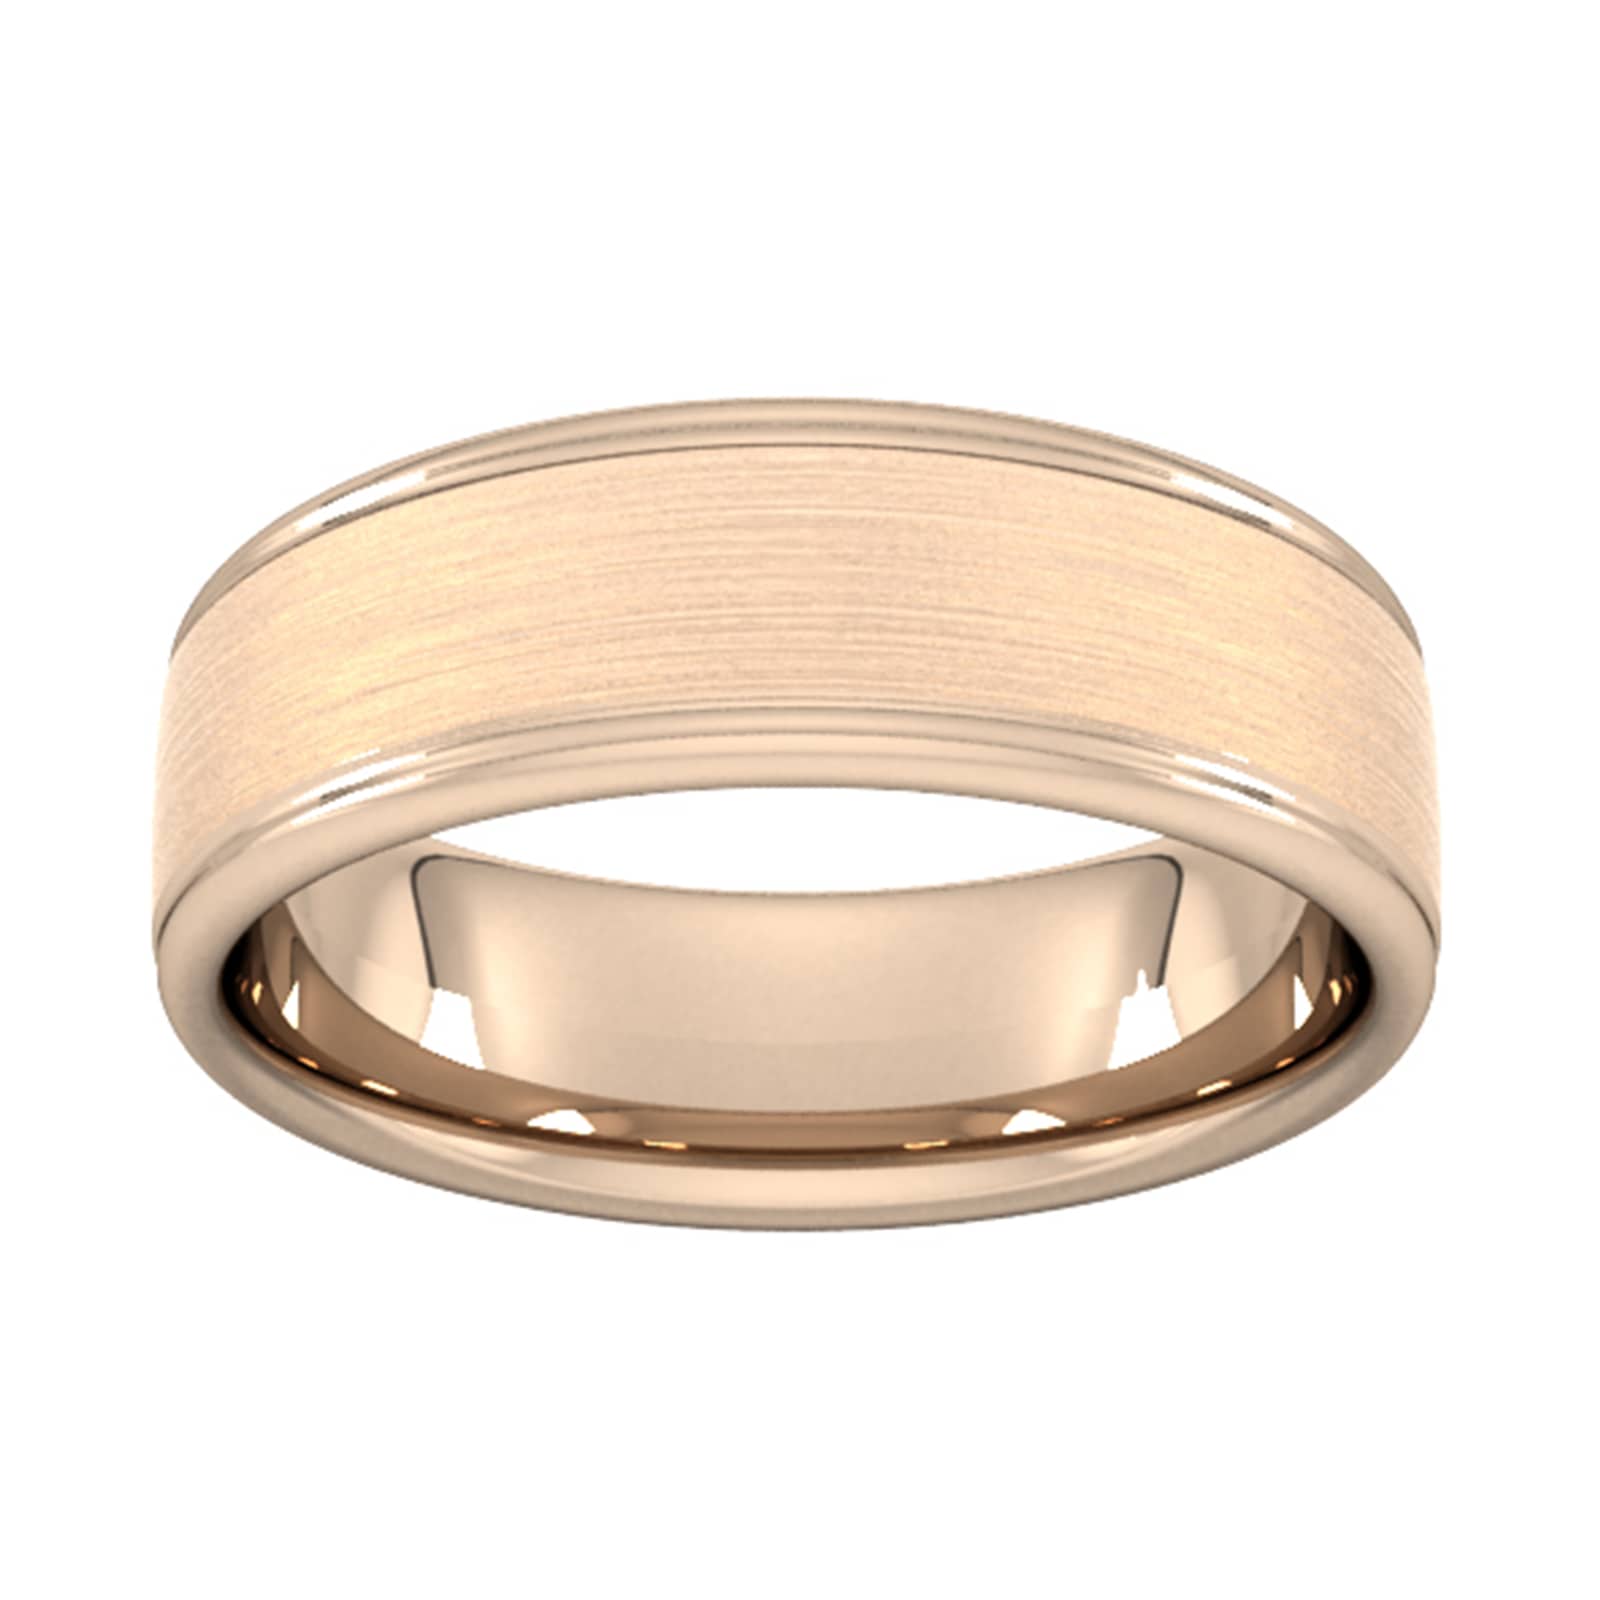 7mm D Shape Heavy Matt Centre With Grooves Wedding Ring In 9 Carat Rose Gold - Ring Size K